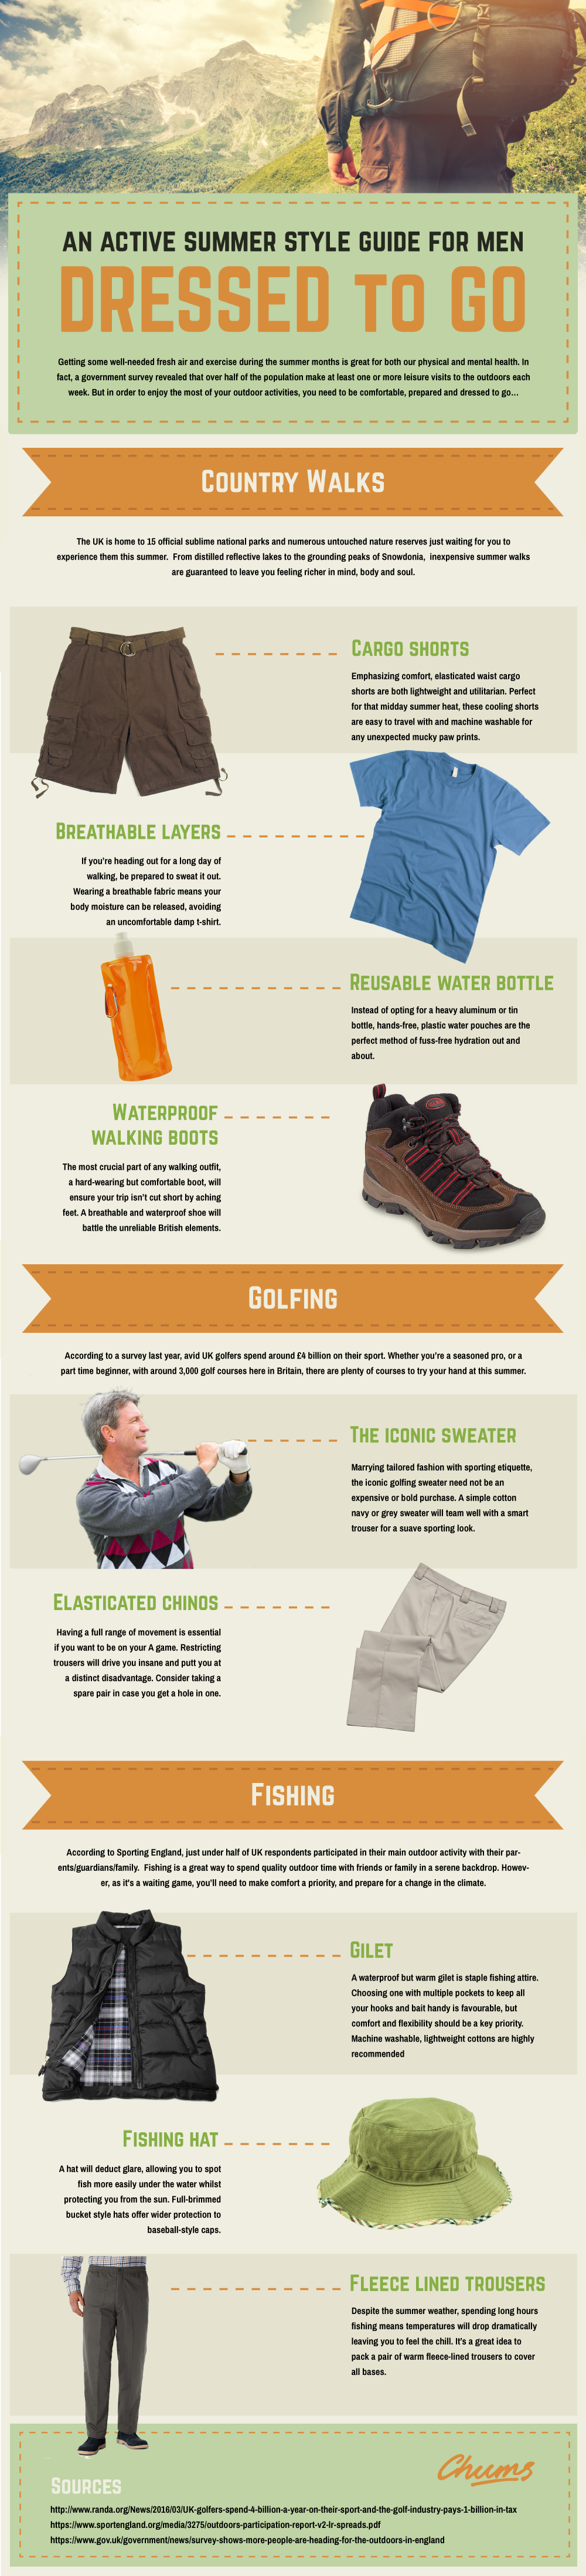 dressed-to-go-infographic (1)